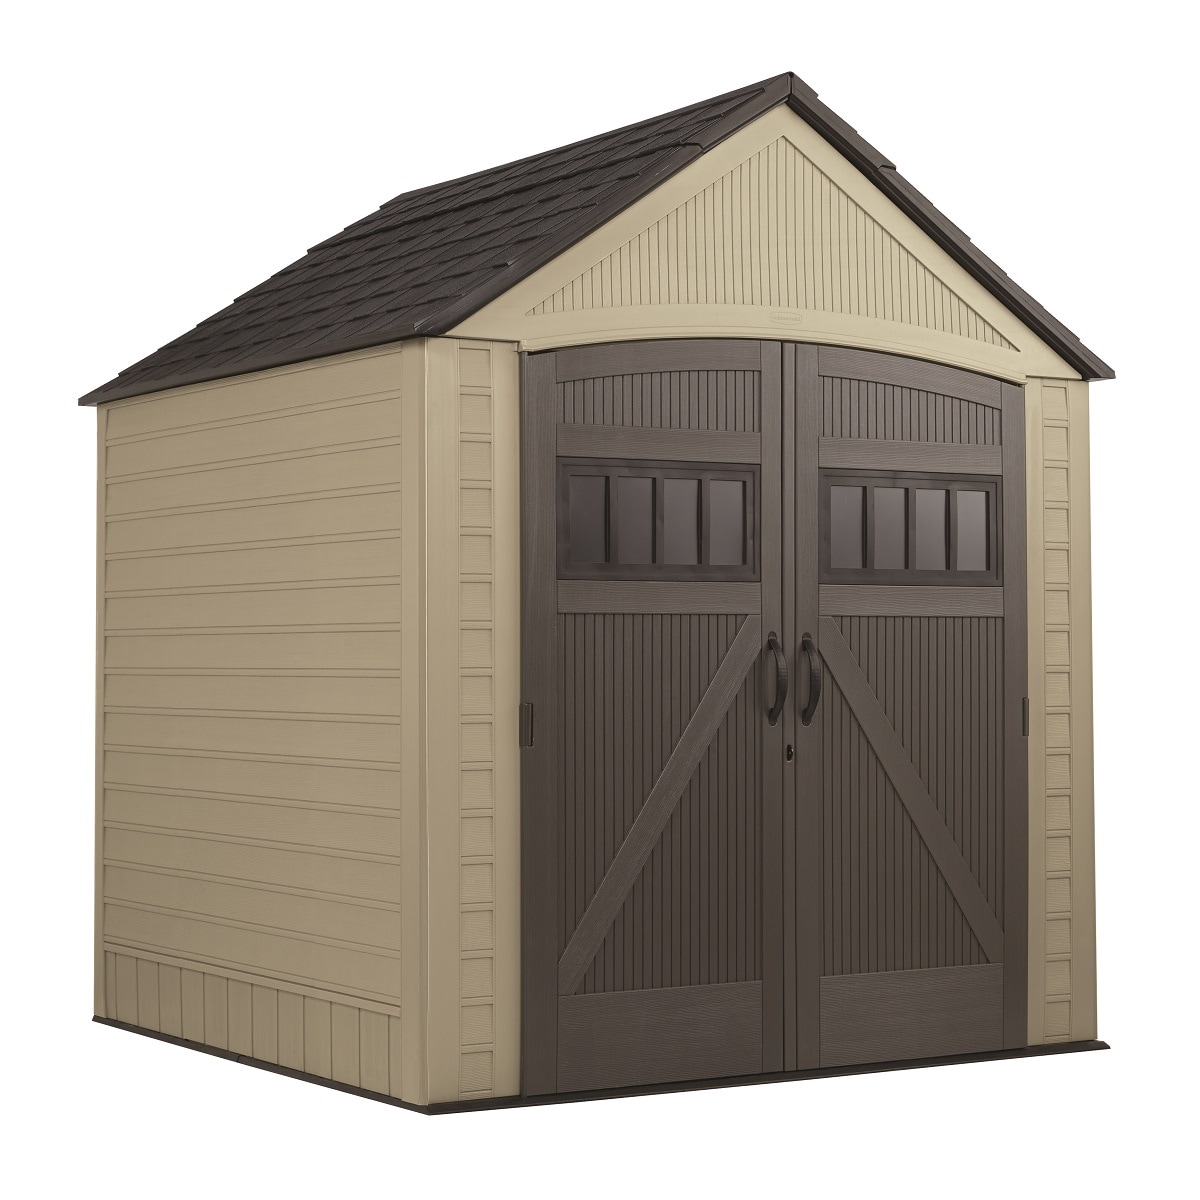 Rubbermaid Large Resin Outdoor Storage Shed, 10.5 x 7 ft., Gray, with  Substantial Space for Home/Garden/Back-Yard/Lawn Equipment